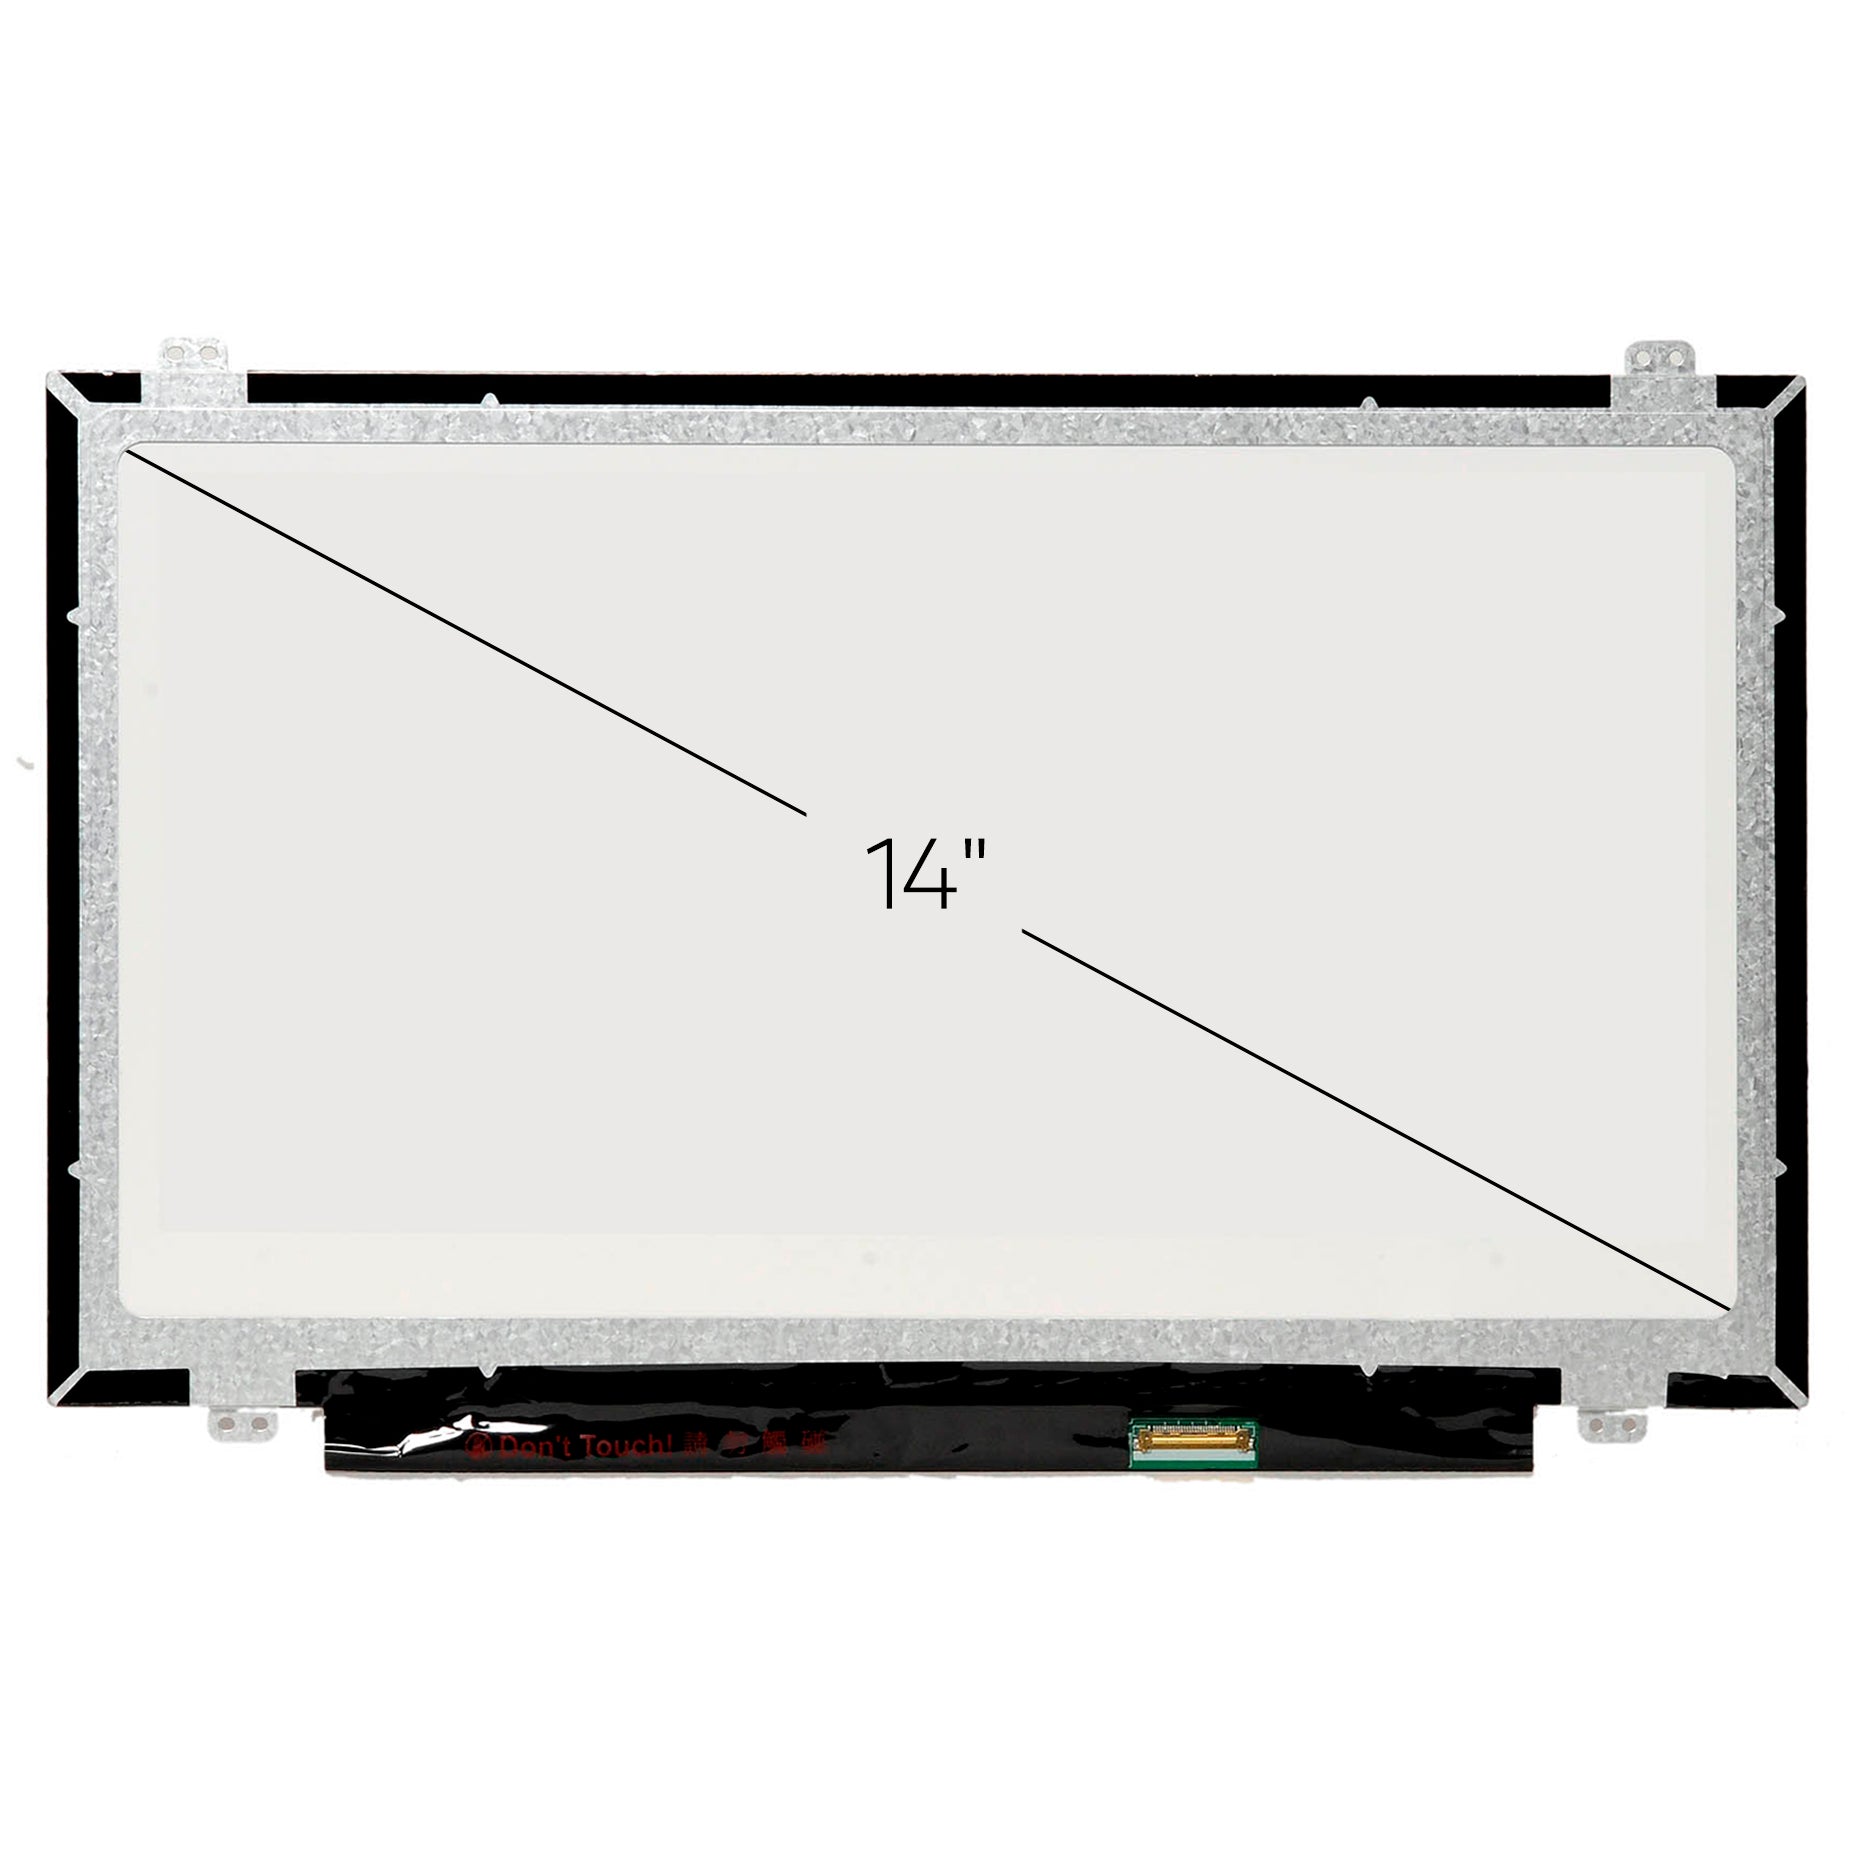 Screen Replacement for HP Probook 640 G1 HD 1366x768 Glossy LCD LED Display